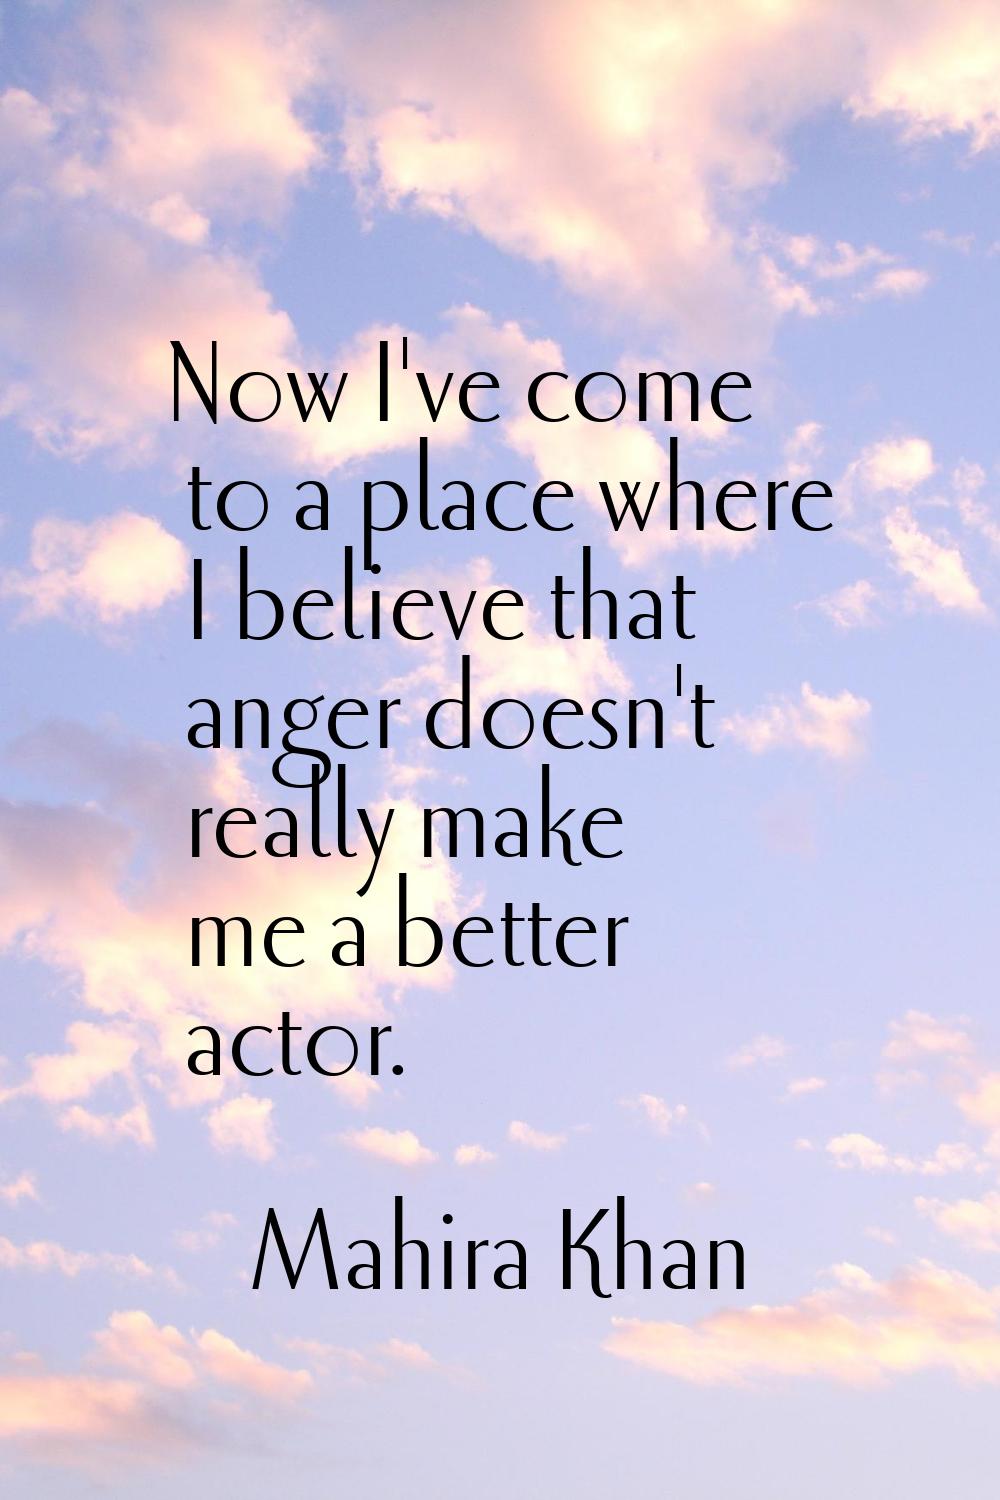 Now I've come to a place where I believe that anger doesn't really make me a better actor.